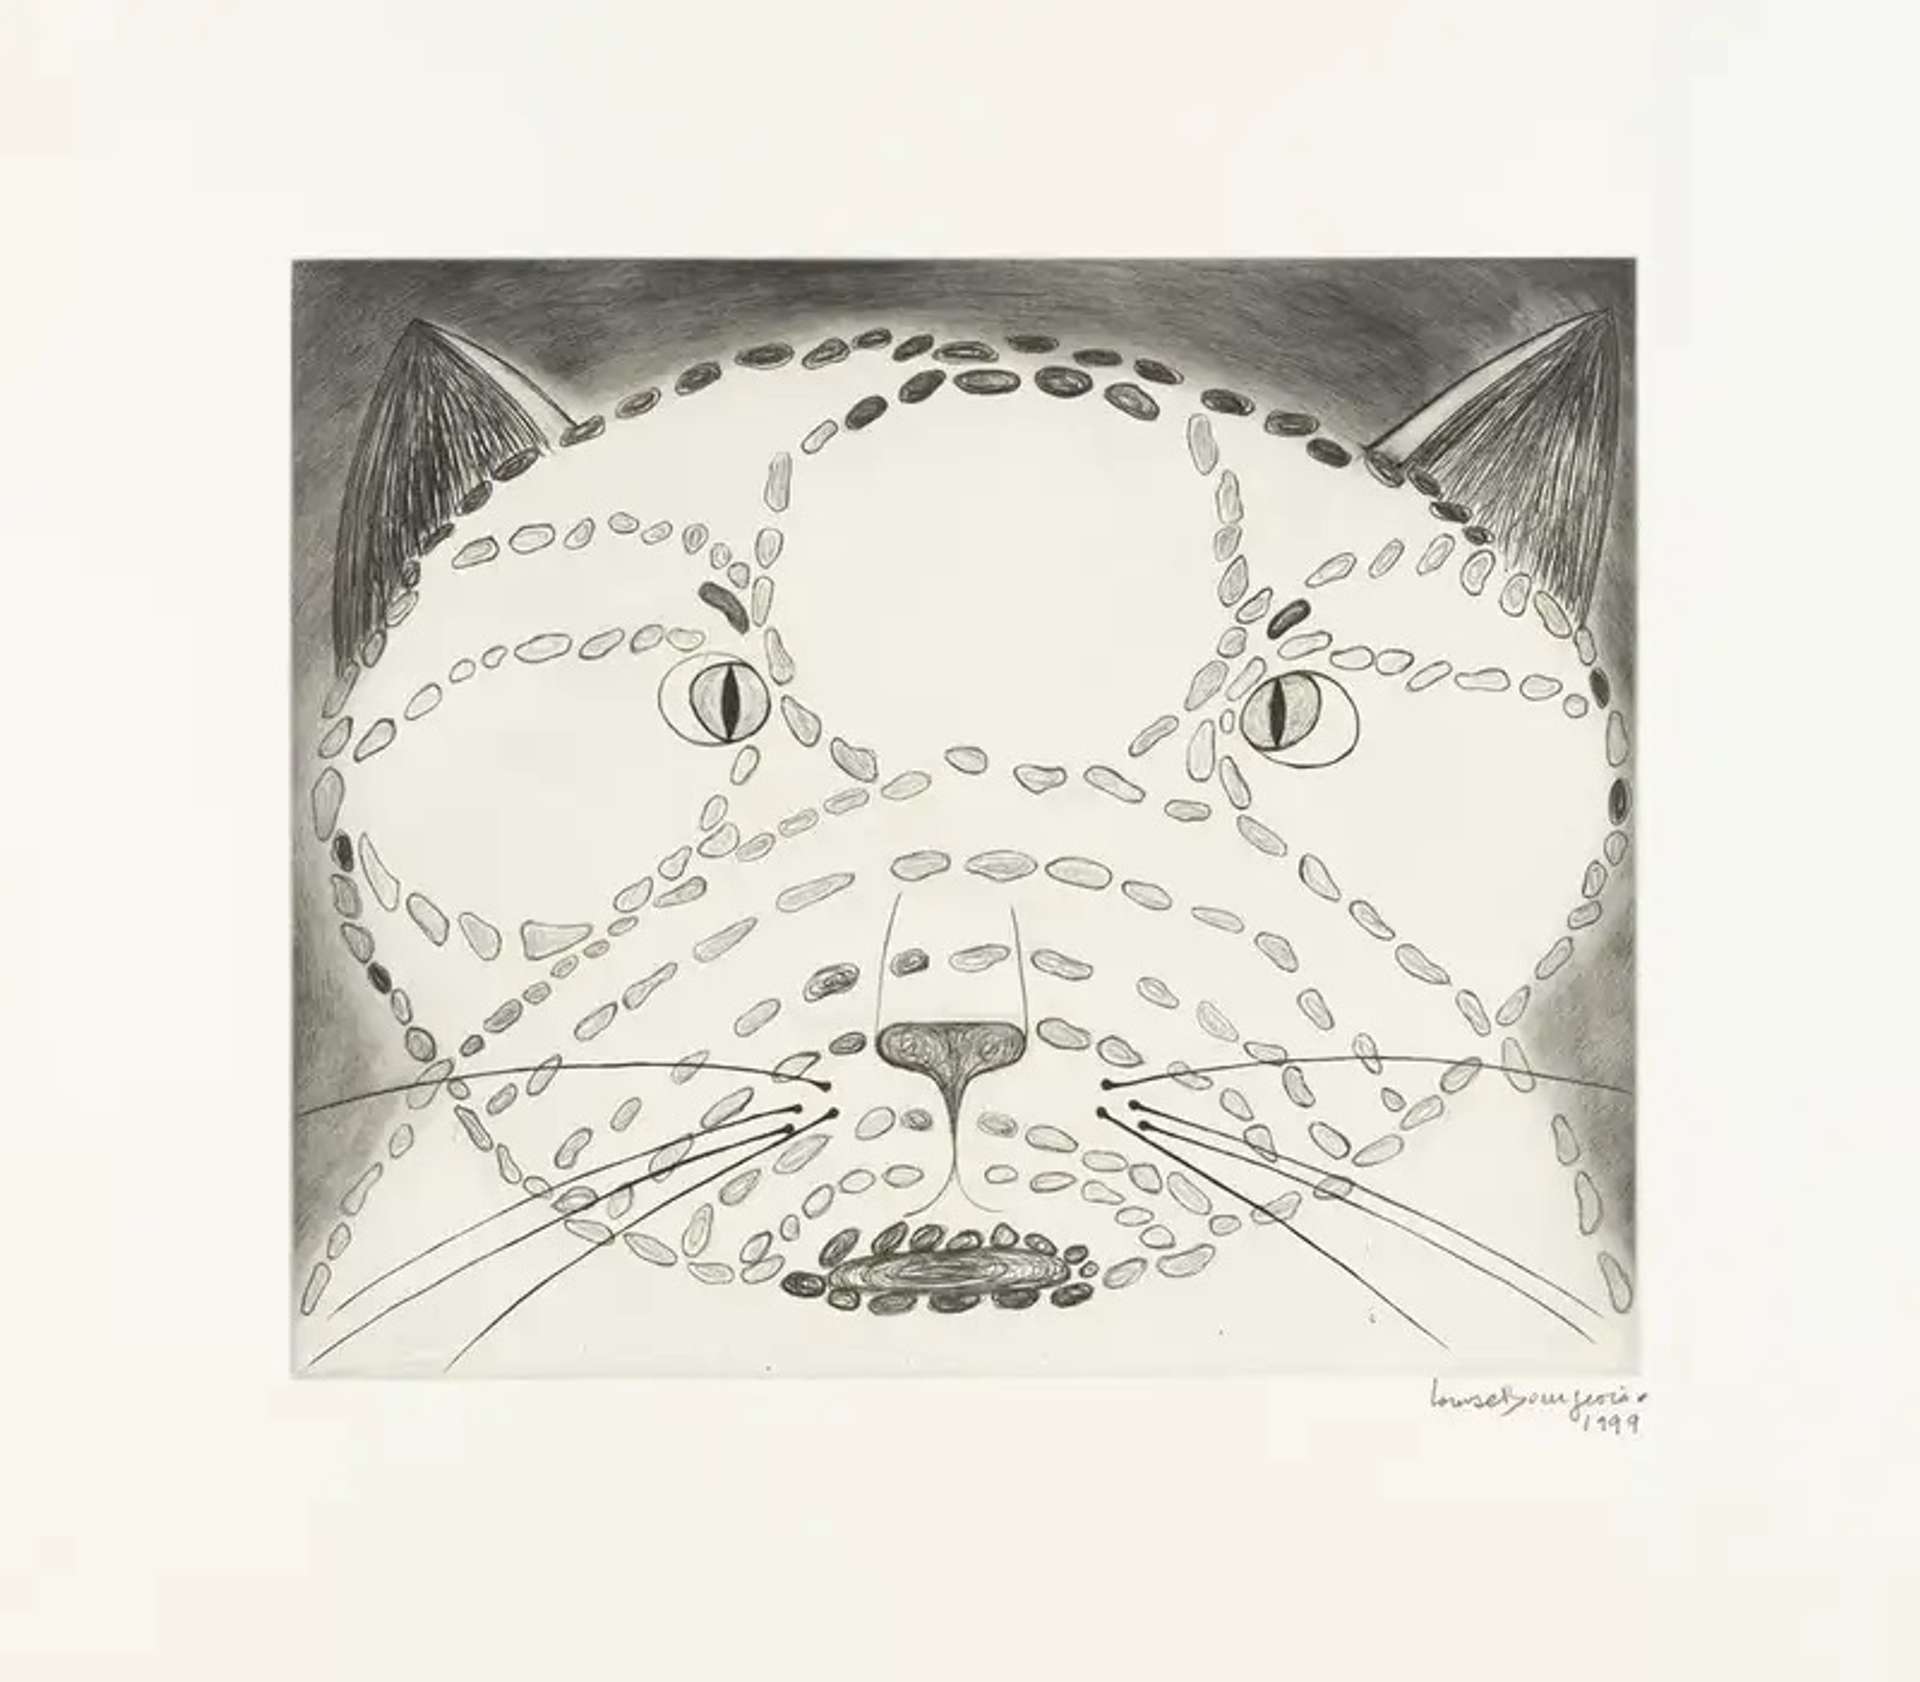 10 Facts About Louise Bourgeois’ The Angry Cat